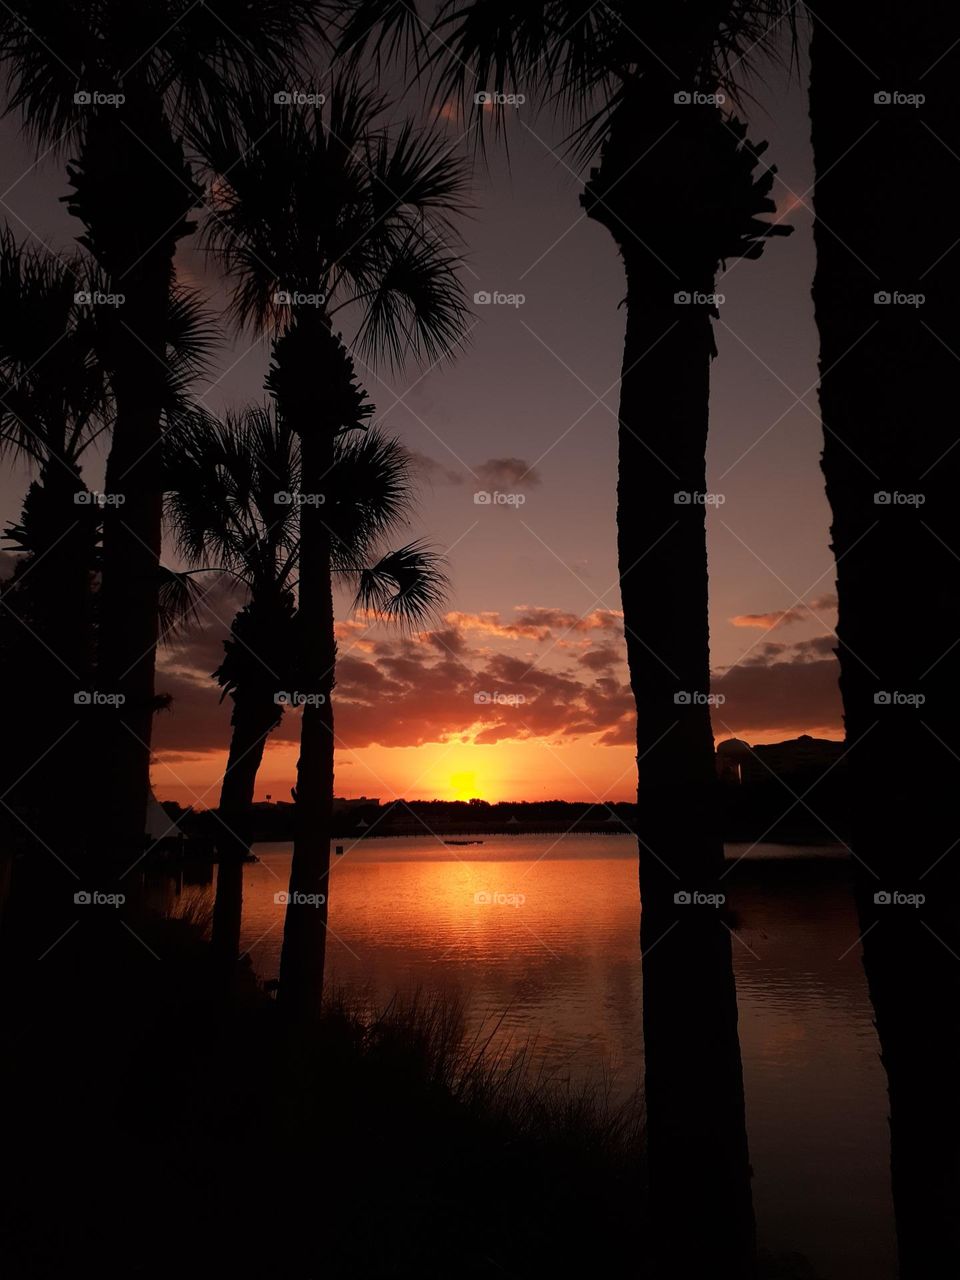 A sunset through the palm trees and over the lake at Cranes Roost Park in Altamonte Springs, Florida.